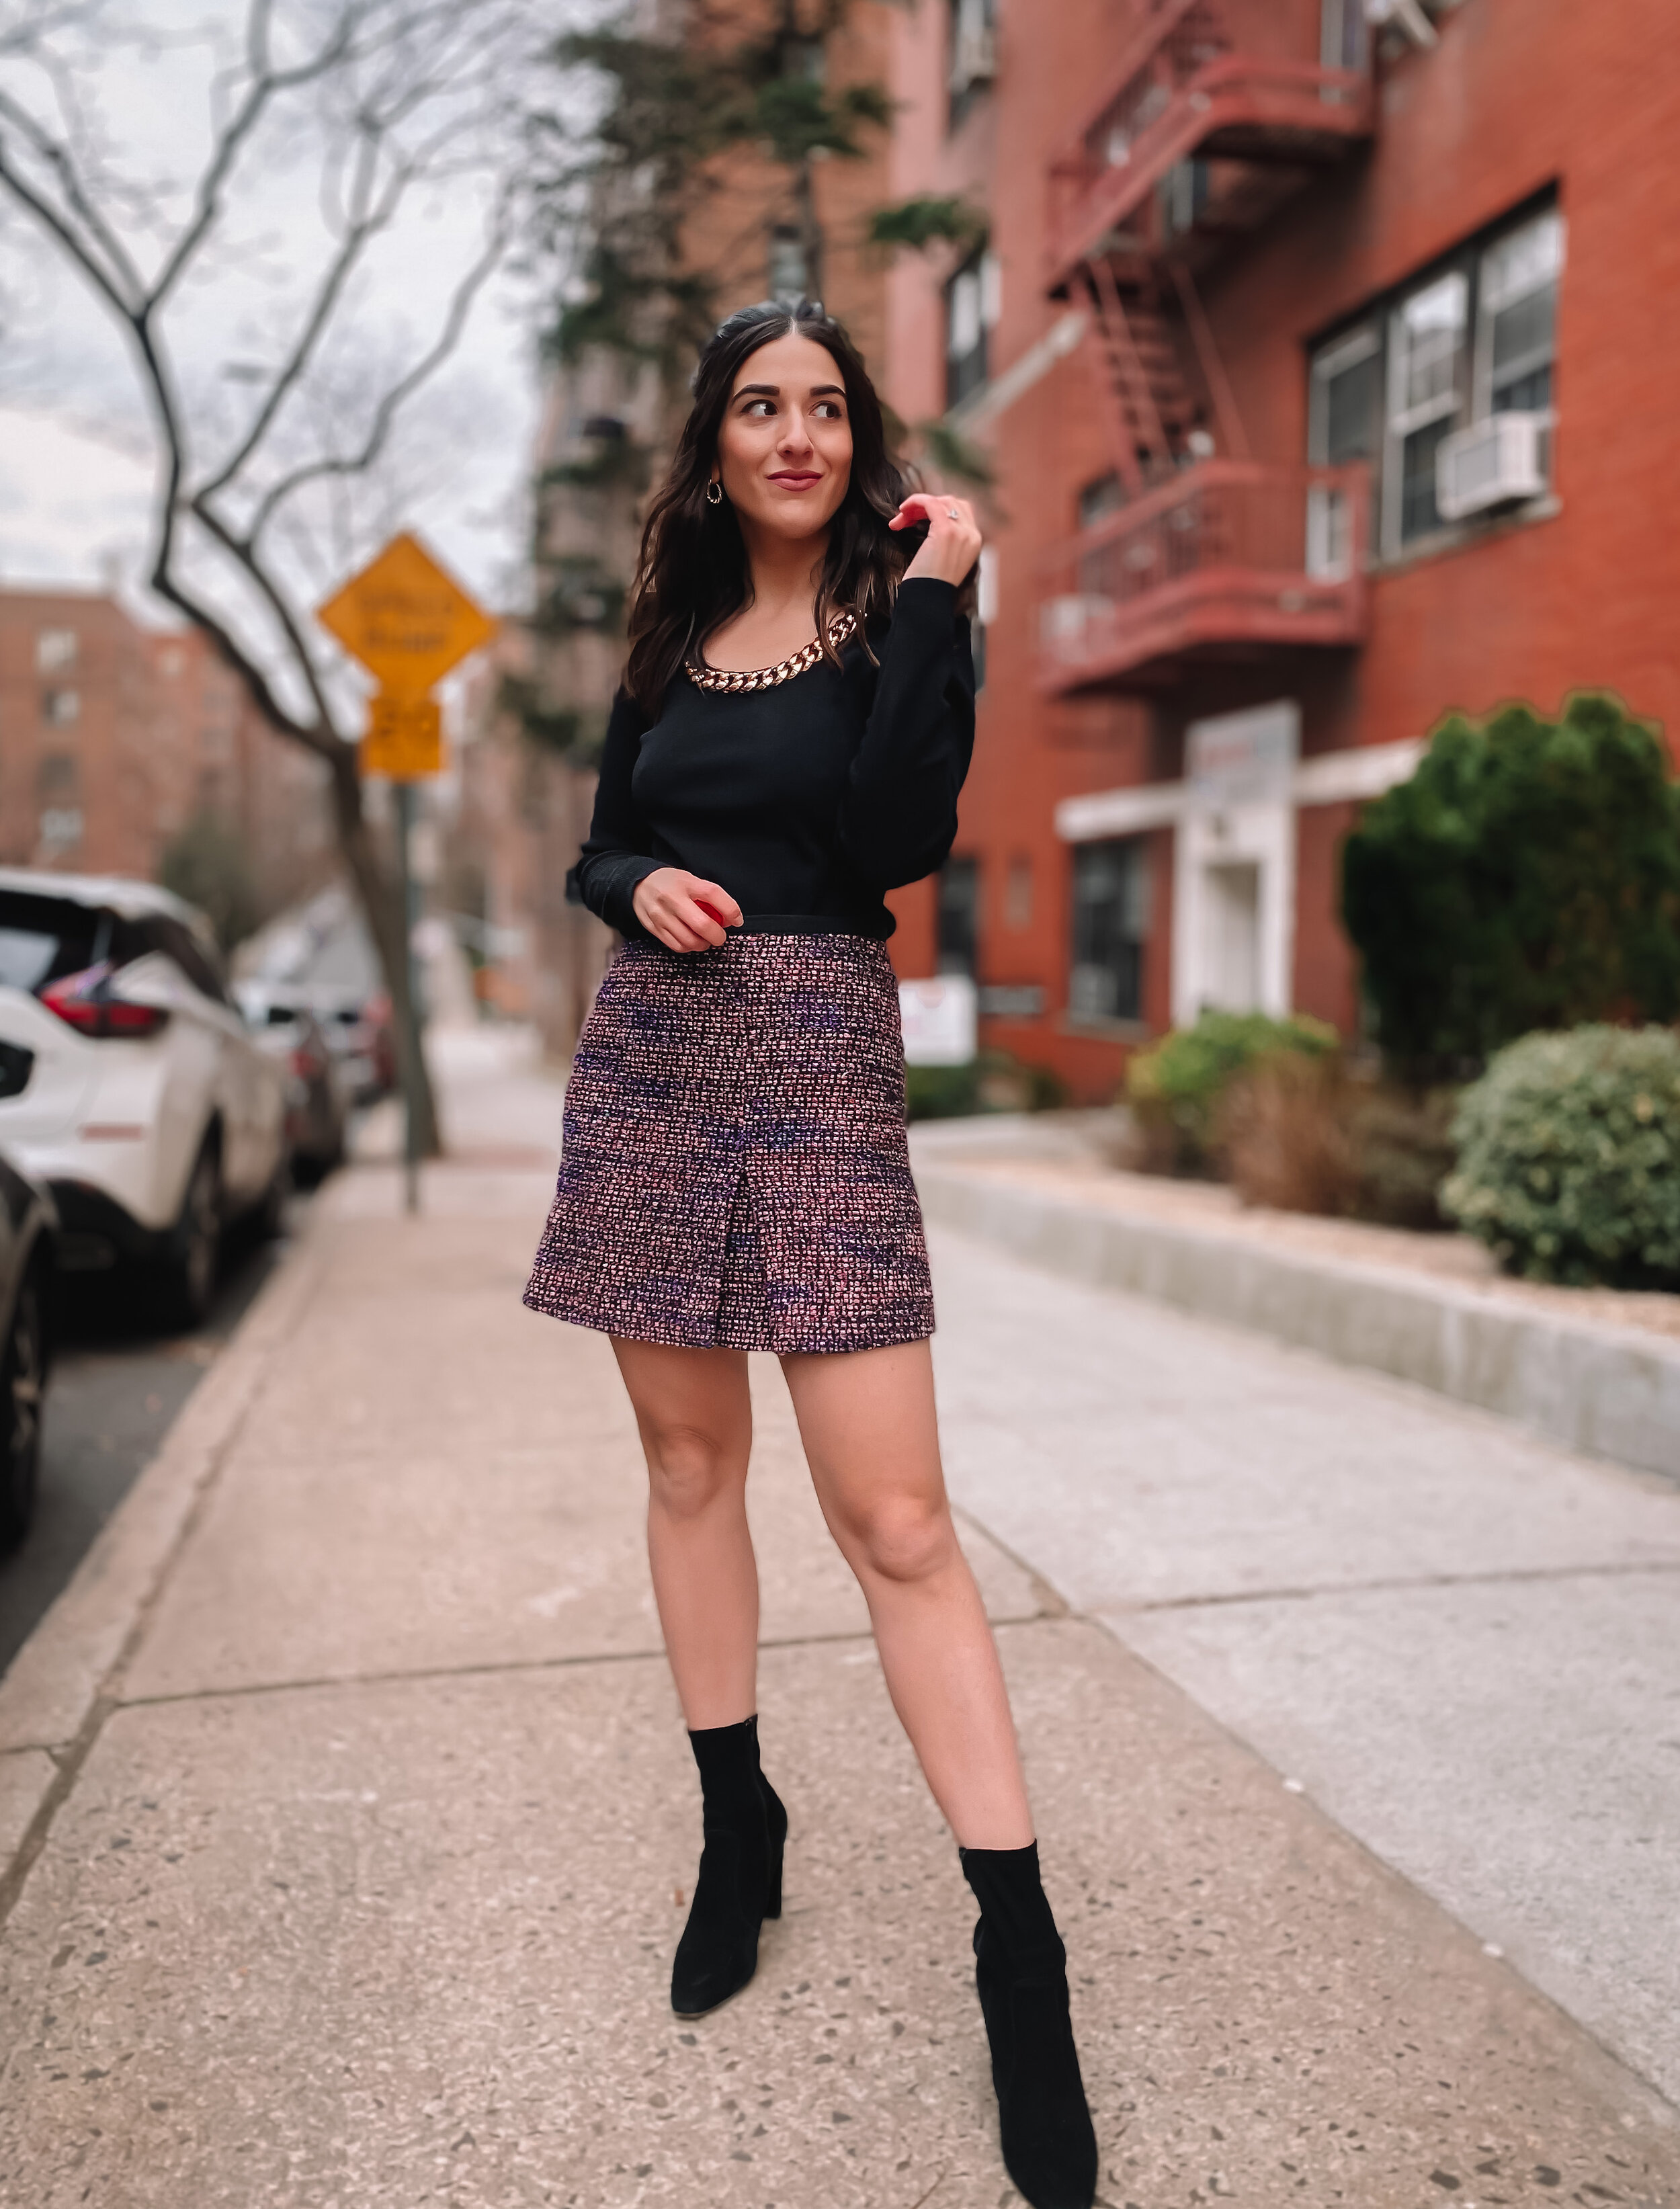 Esther Santer NYC Street Style Fashion Blogger Chain Top Nicole Miller H&M Tweed Skirt Gold Jewelry Inez Black Booties Shop Women Winter Fall Wear Styling Tripod Self Photography New York City Sock Booties Styling Black Shirt Pink Purple.JPG